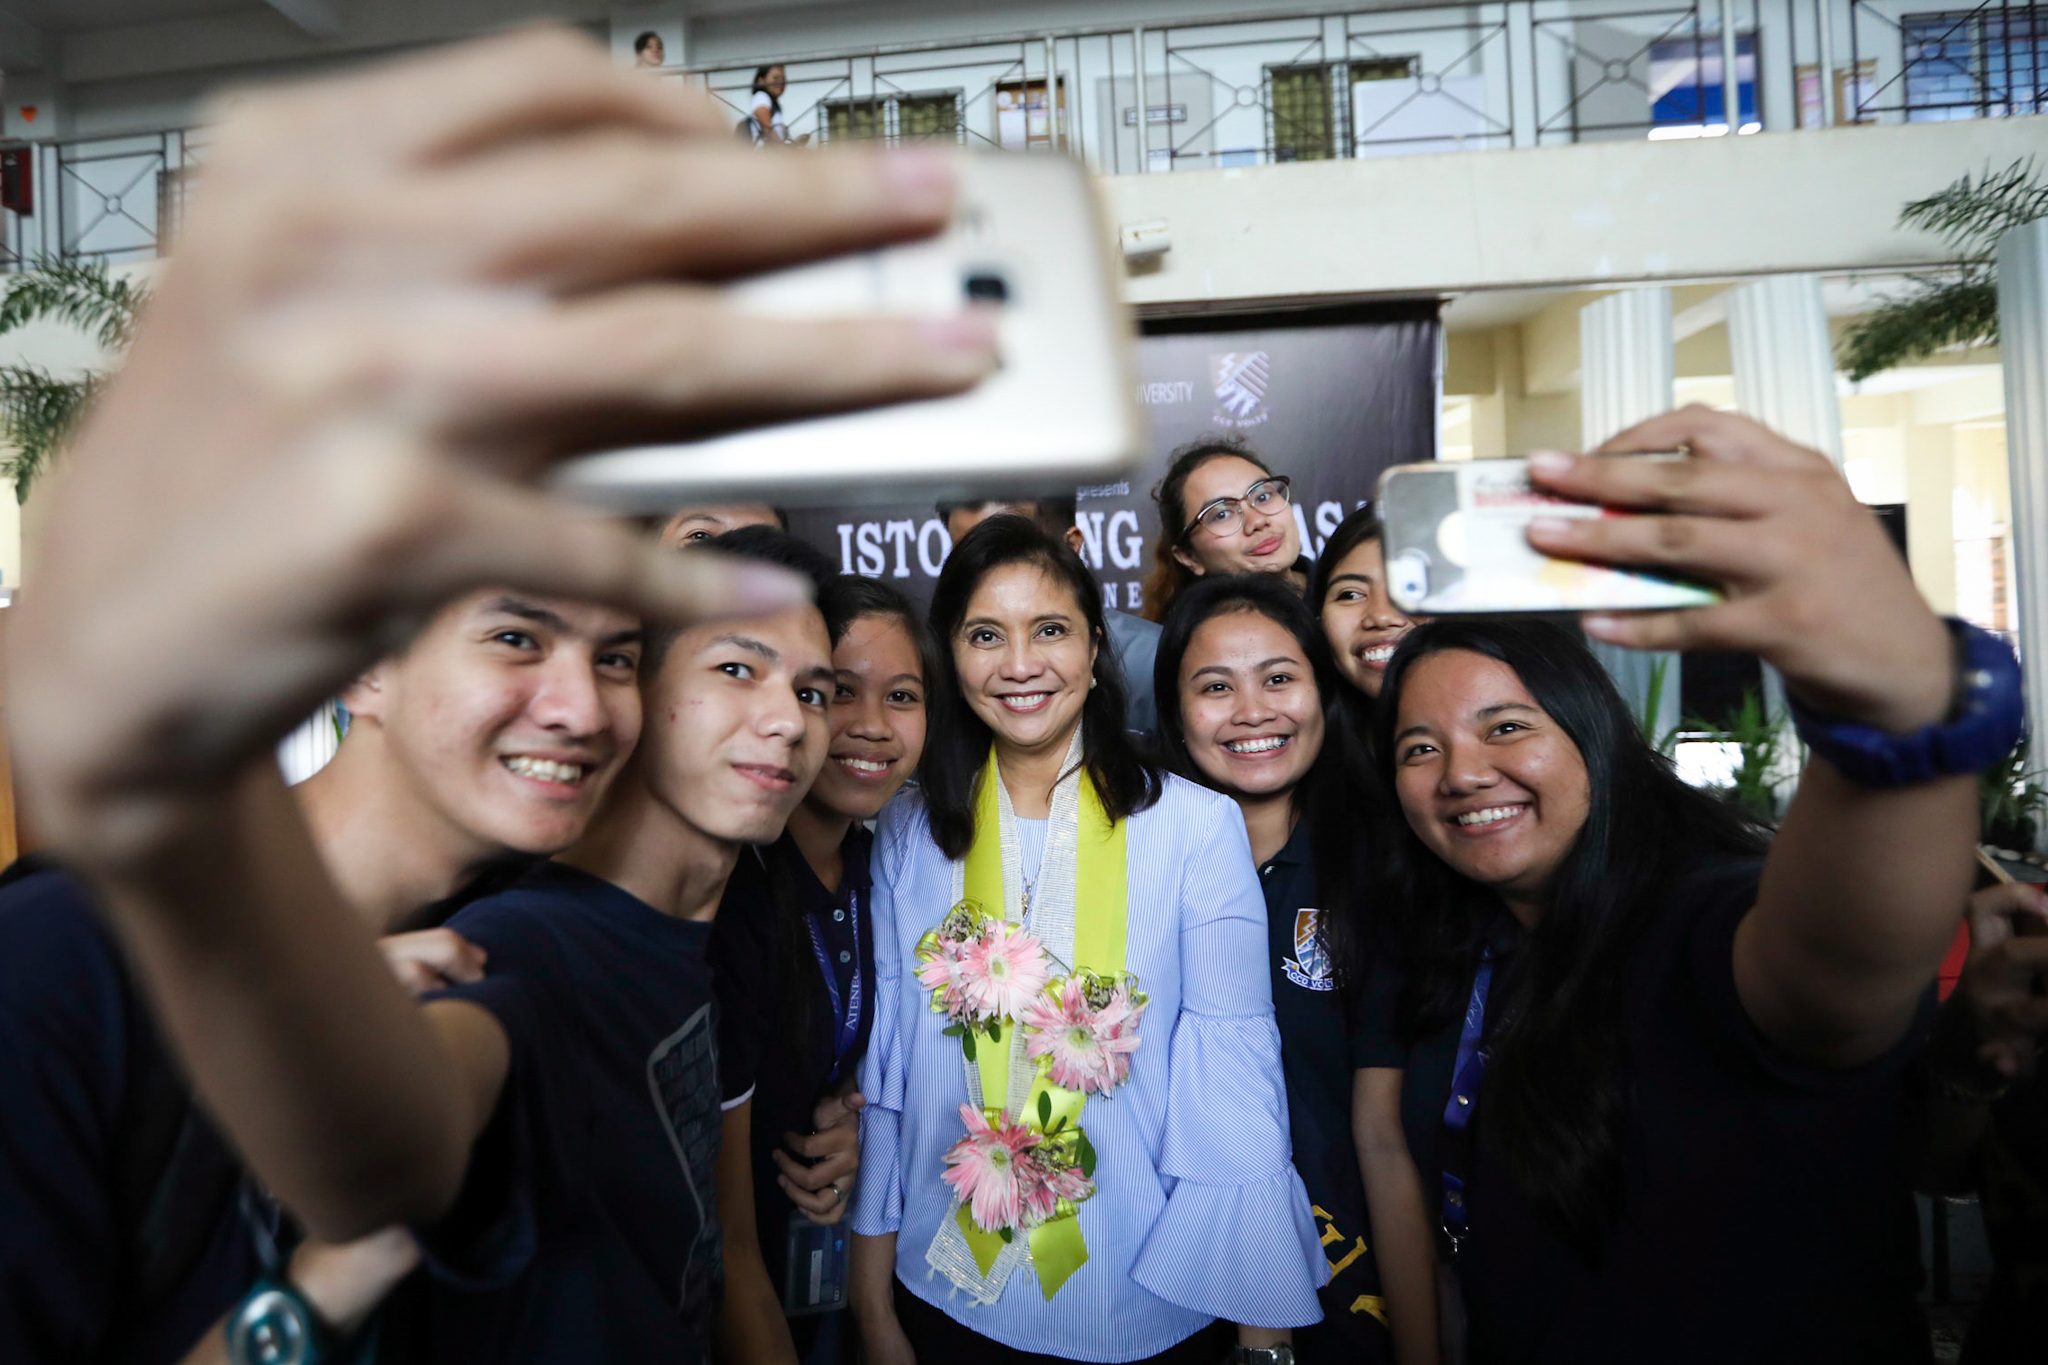 What does Leni Robredo think about online bashers?